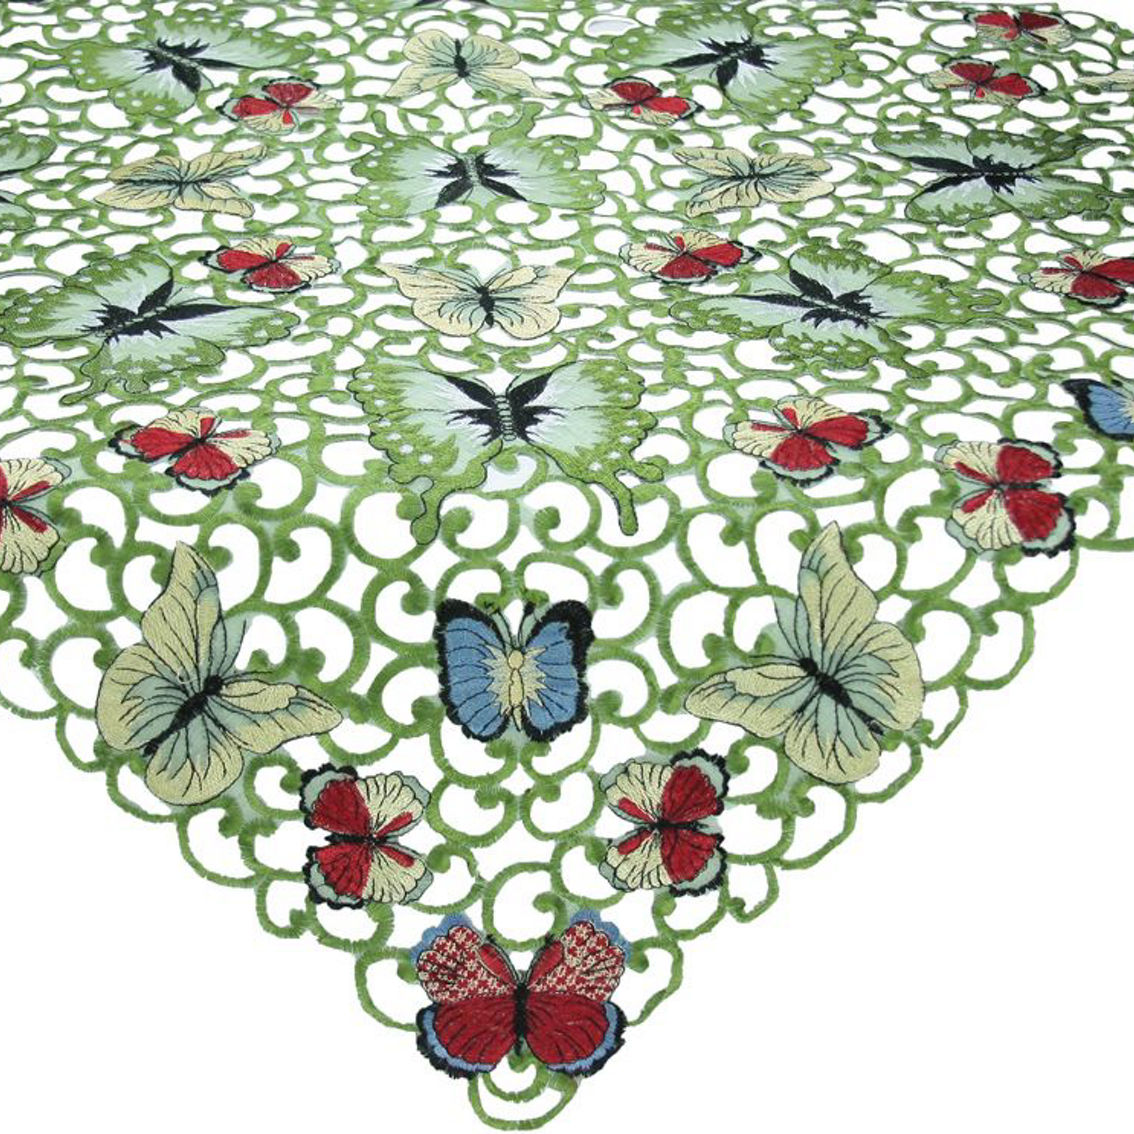 Xia Home Fashions, Butterflies Embroidered Cutwork 36-Inch By 36-Inch Table Topper - Image 2 of 2